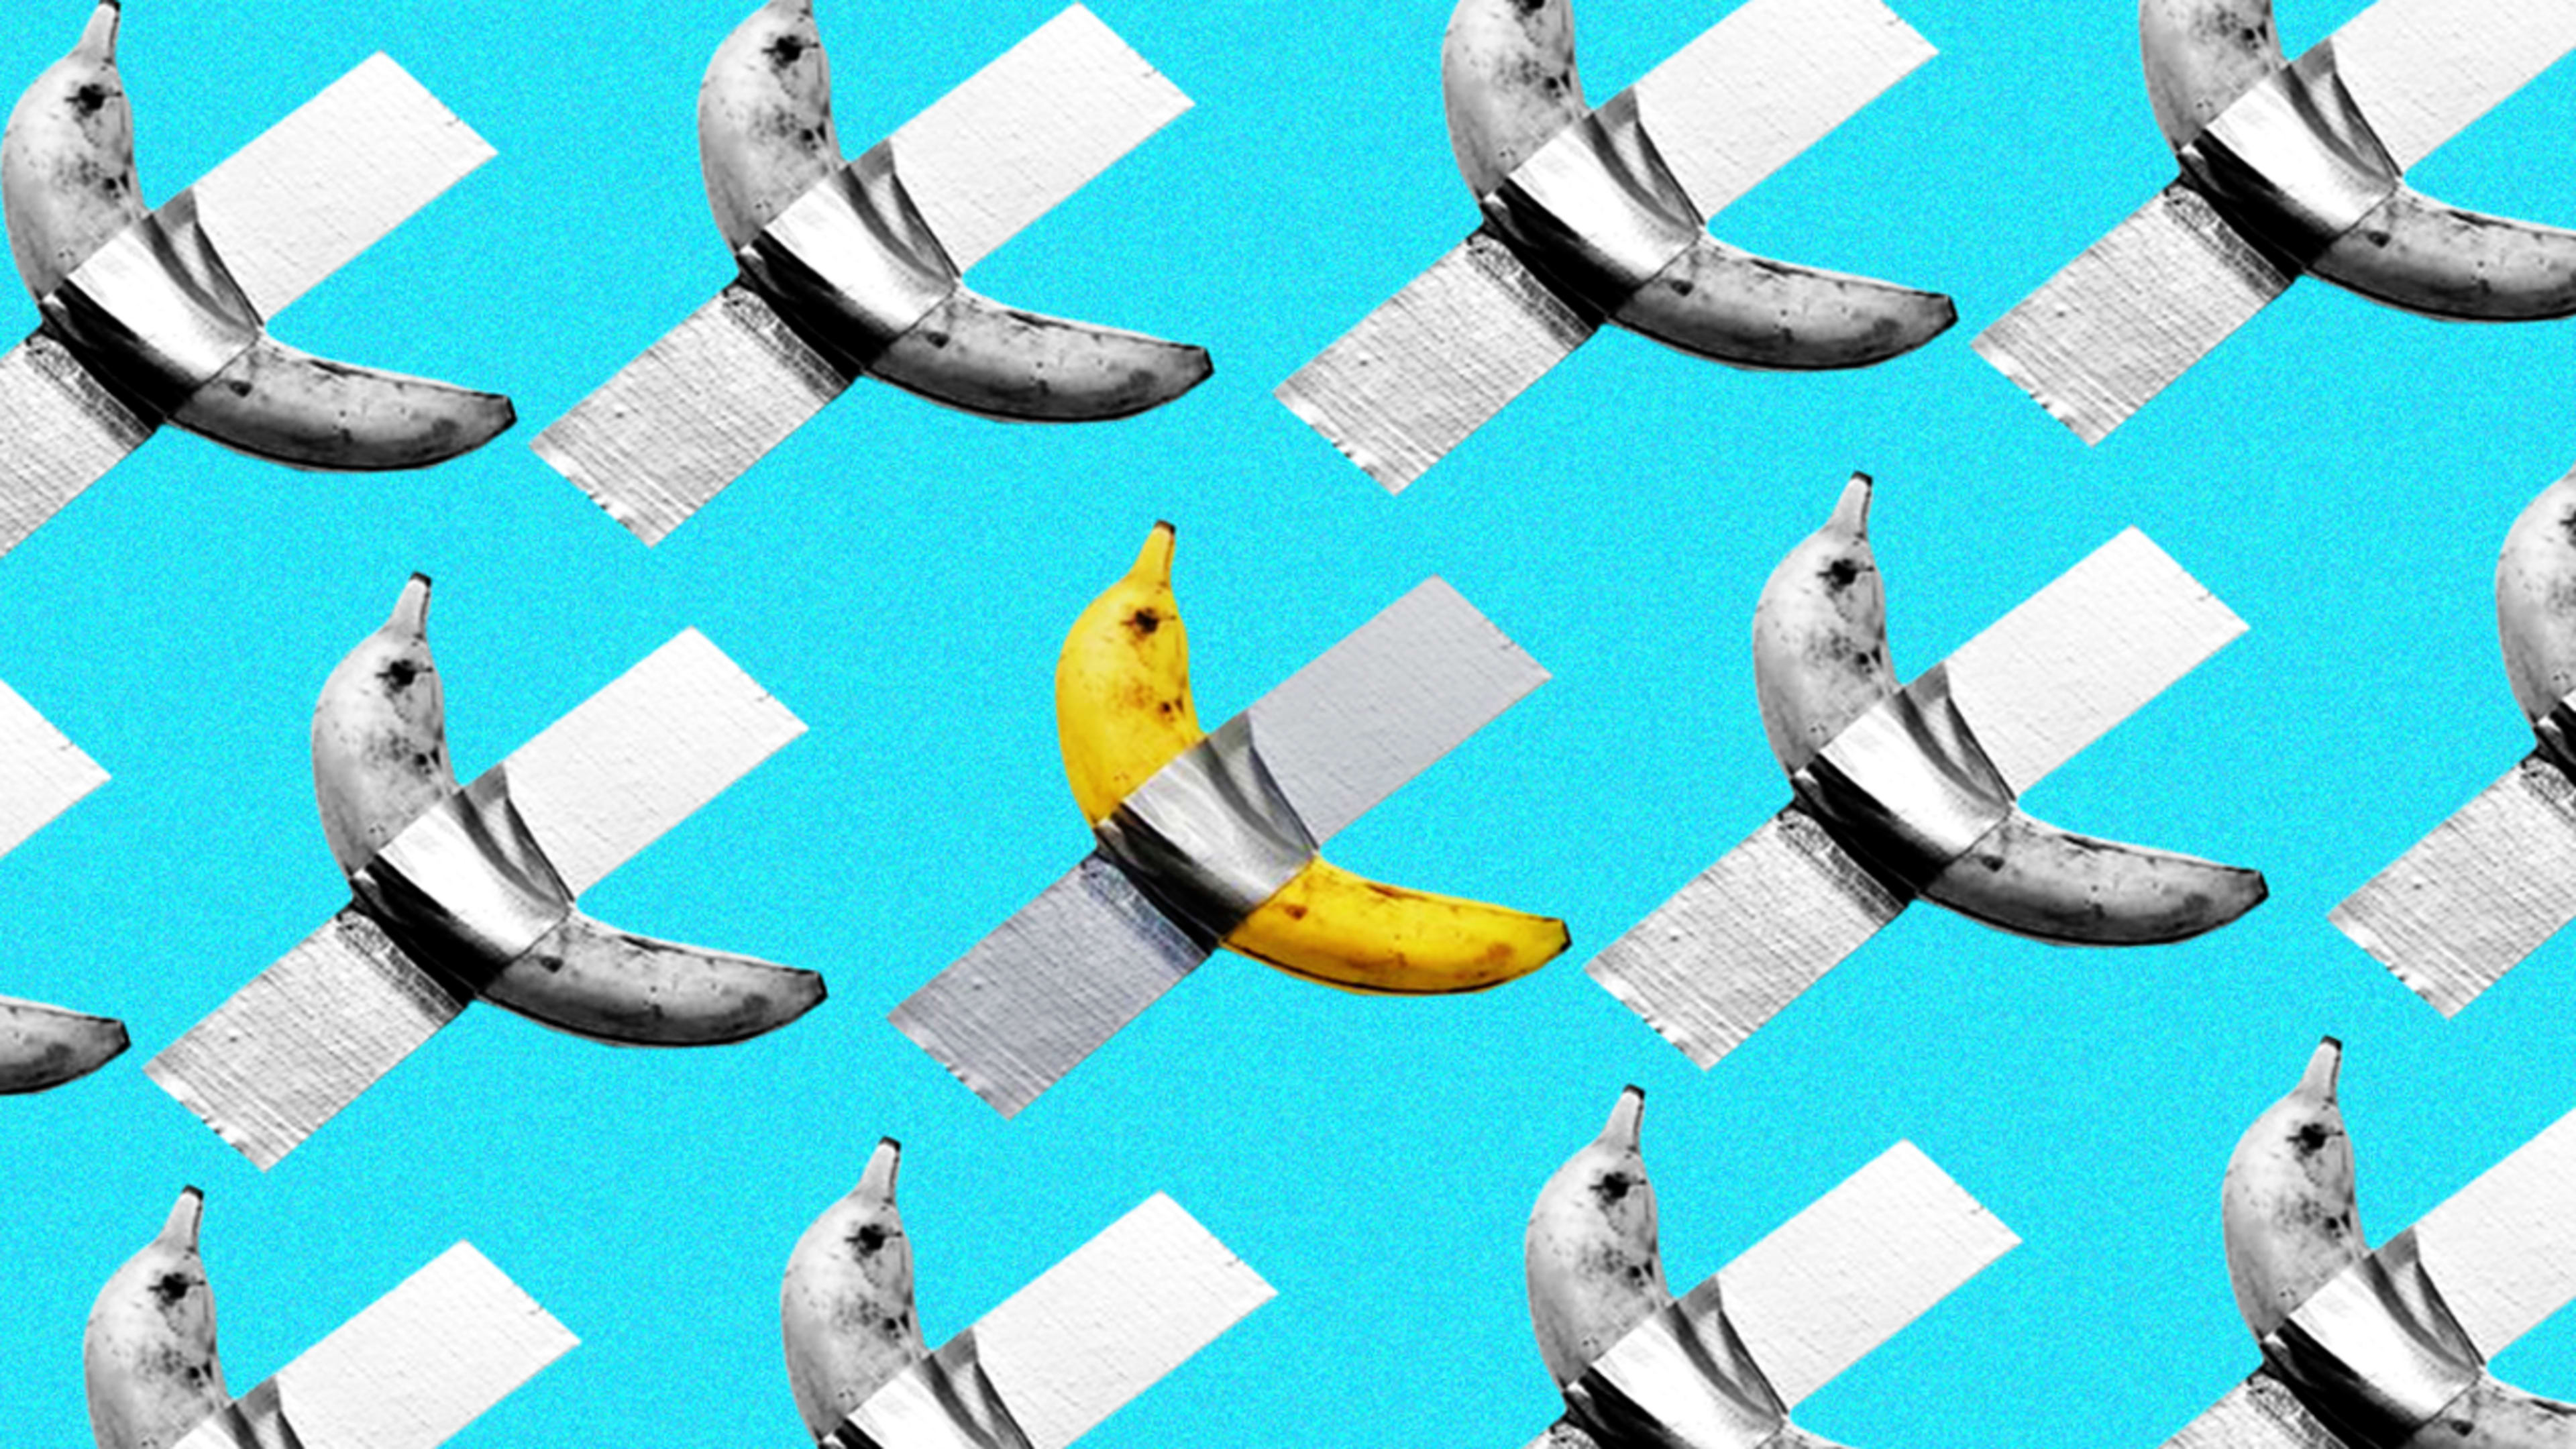 That $120,000 banana taped to a wall shows the limitations of zeitgeist-y advertising